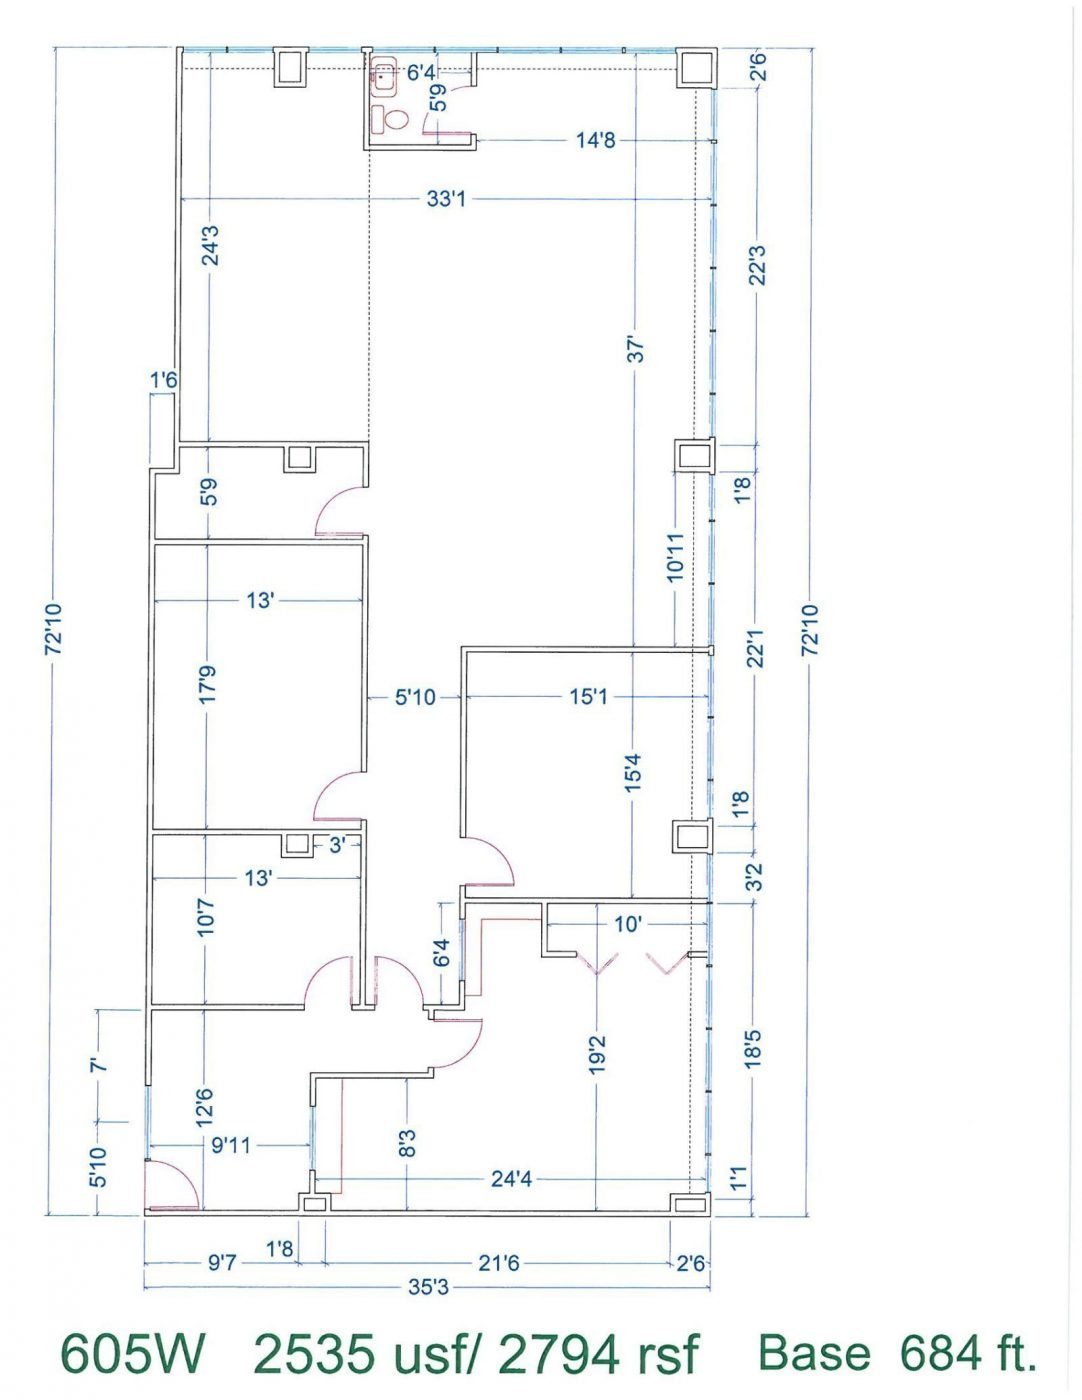 Floor Plan for unit 605W at 15565 Northland Dr Southfield, MI 48075